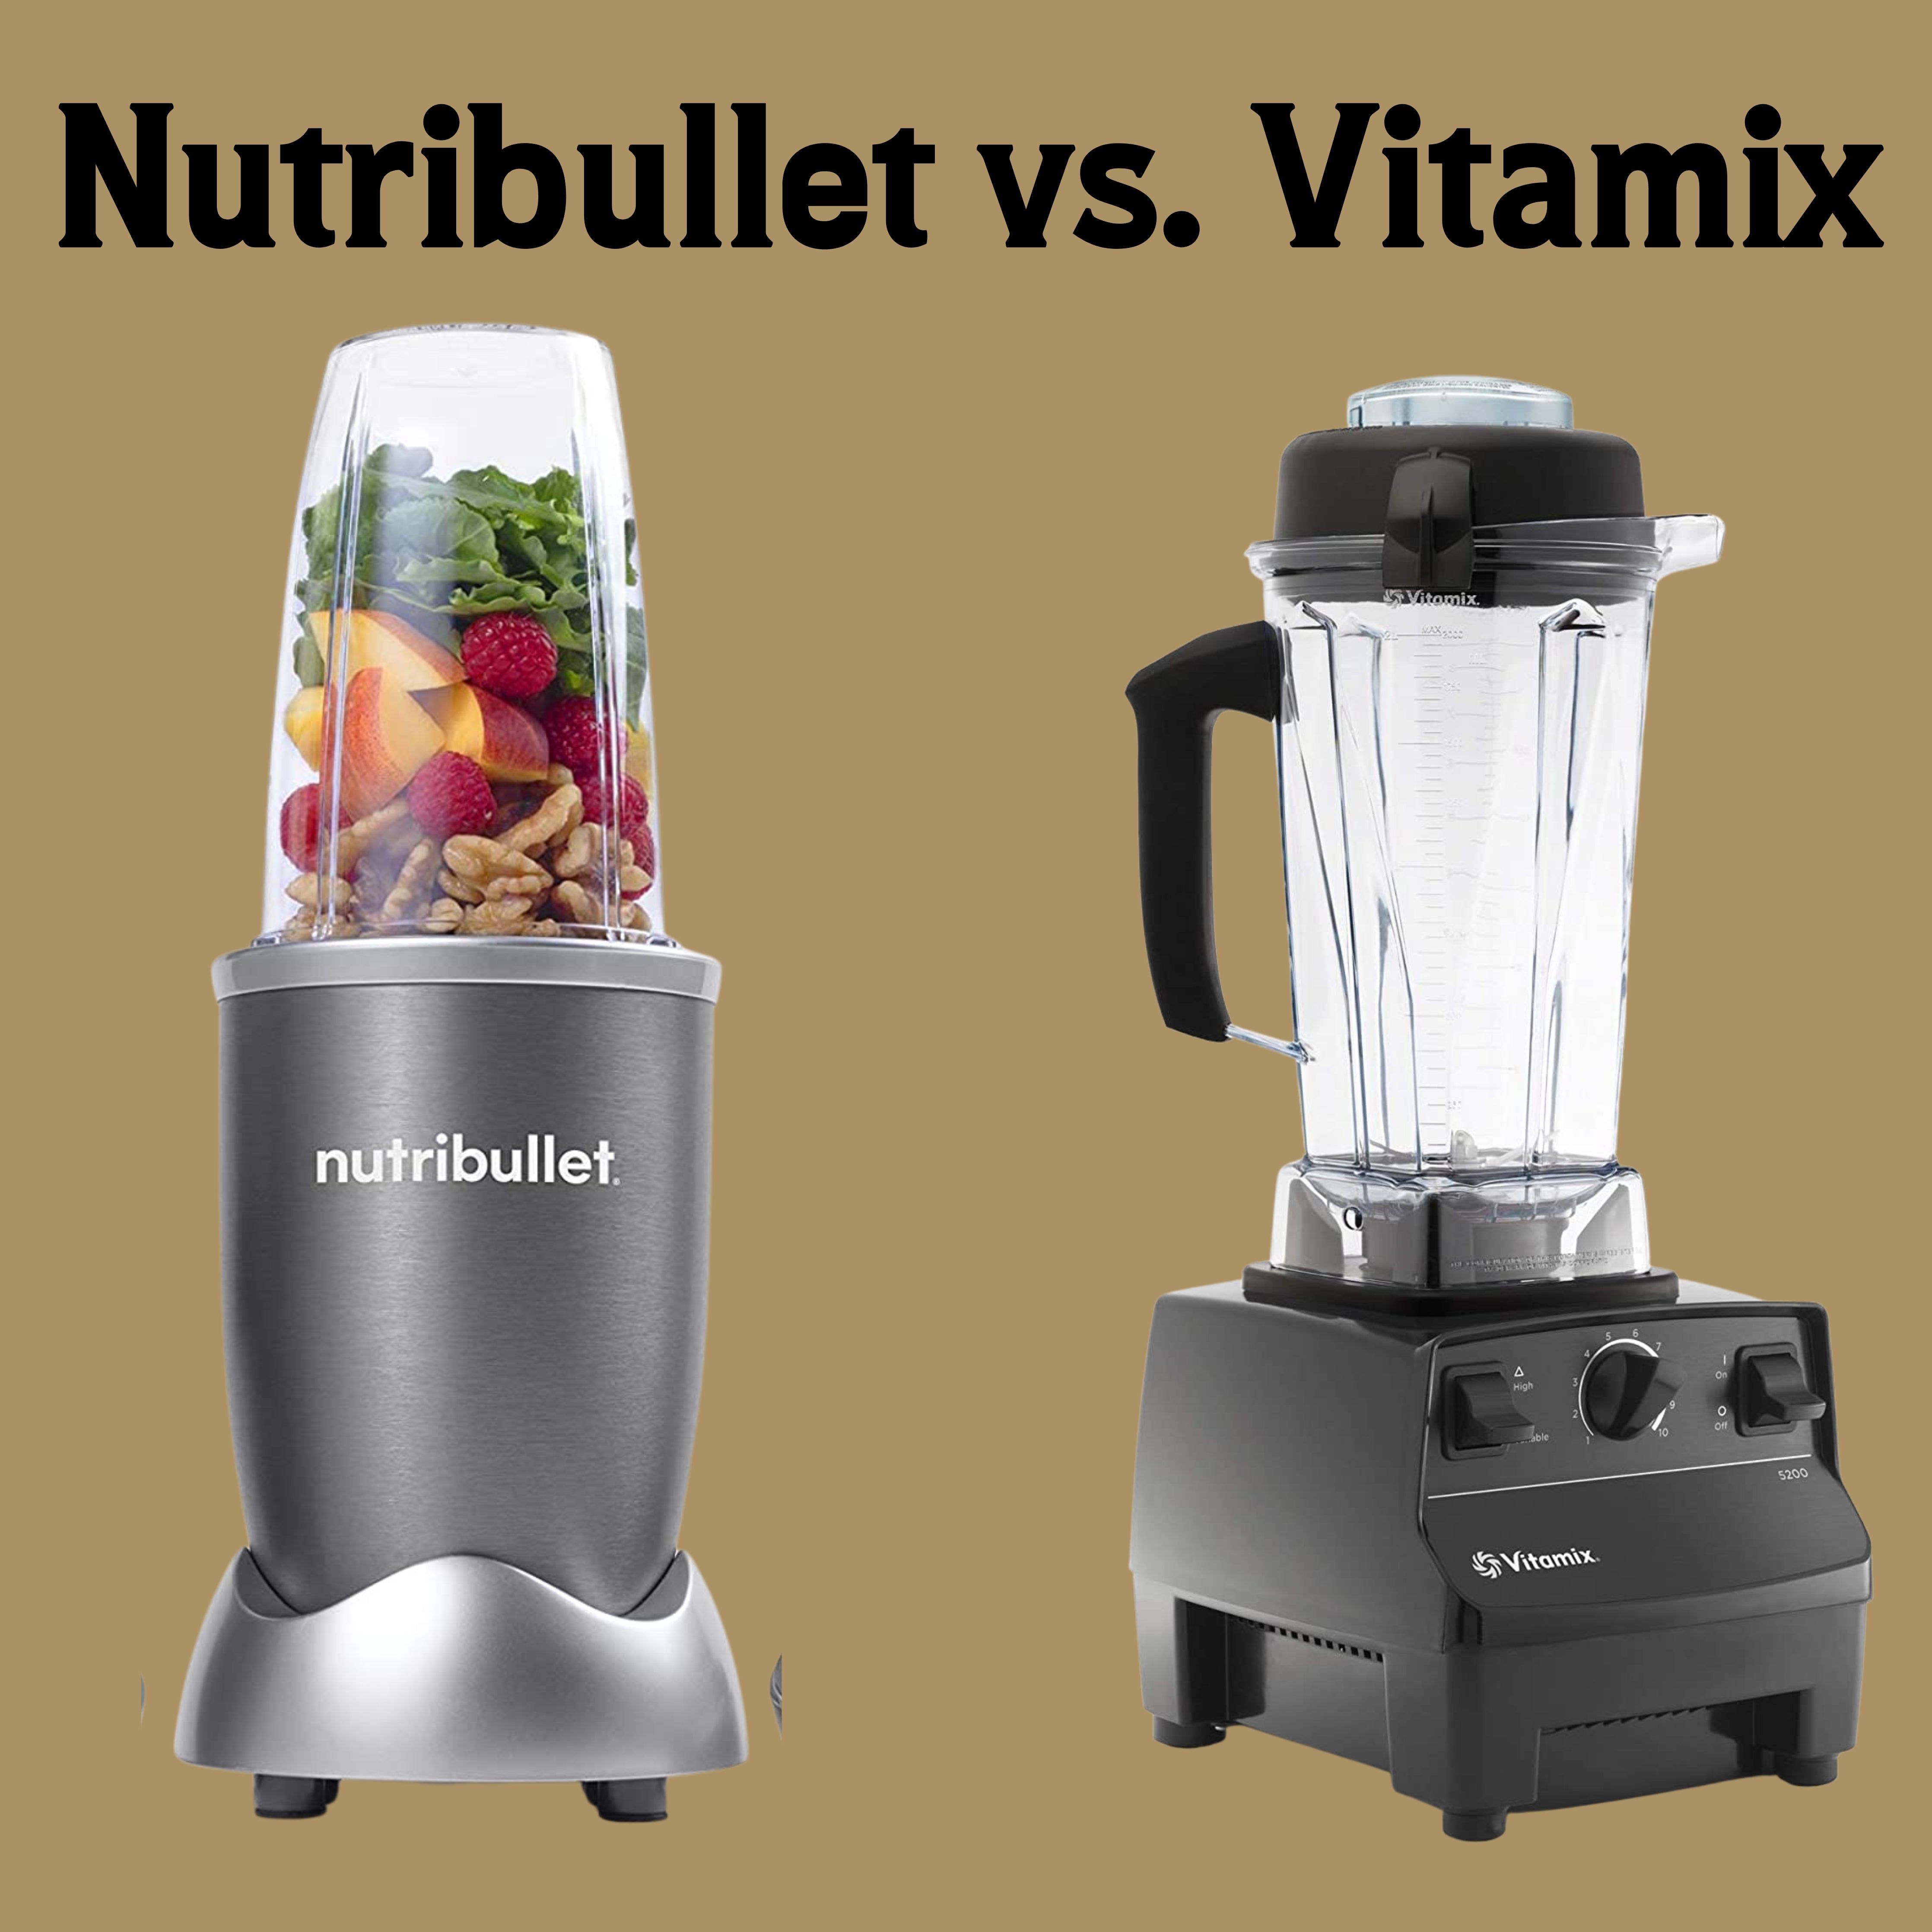 Nutribullet Vitamix: Which is Best for Smoothies? – GILSSON MARKETPLACE